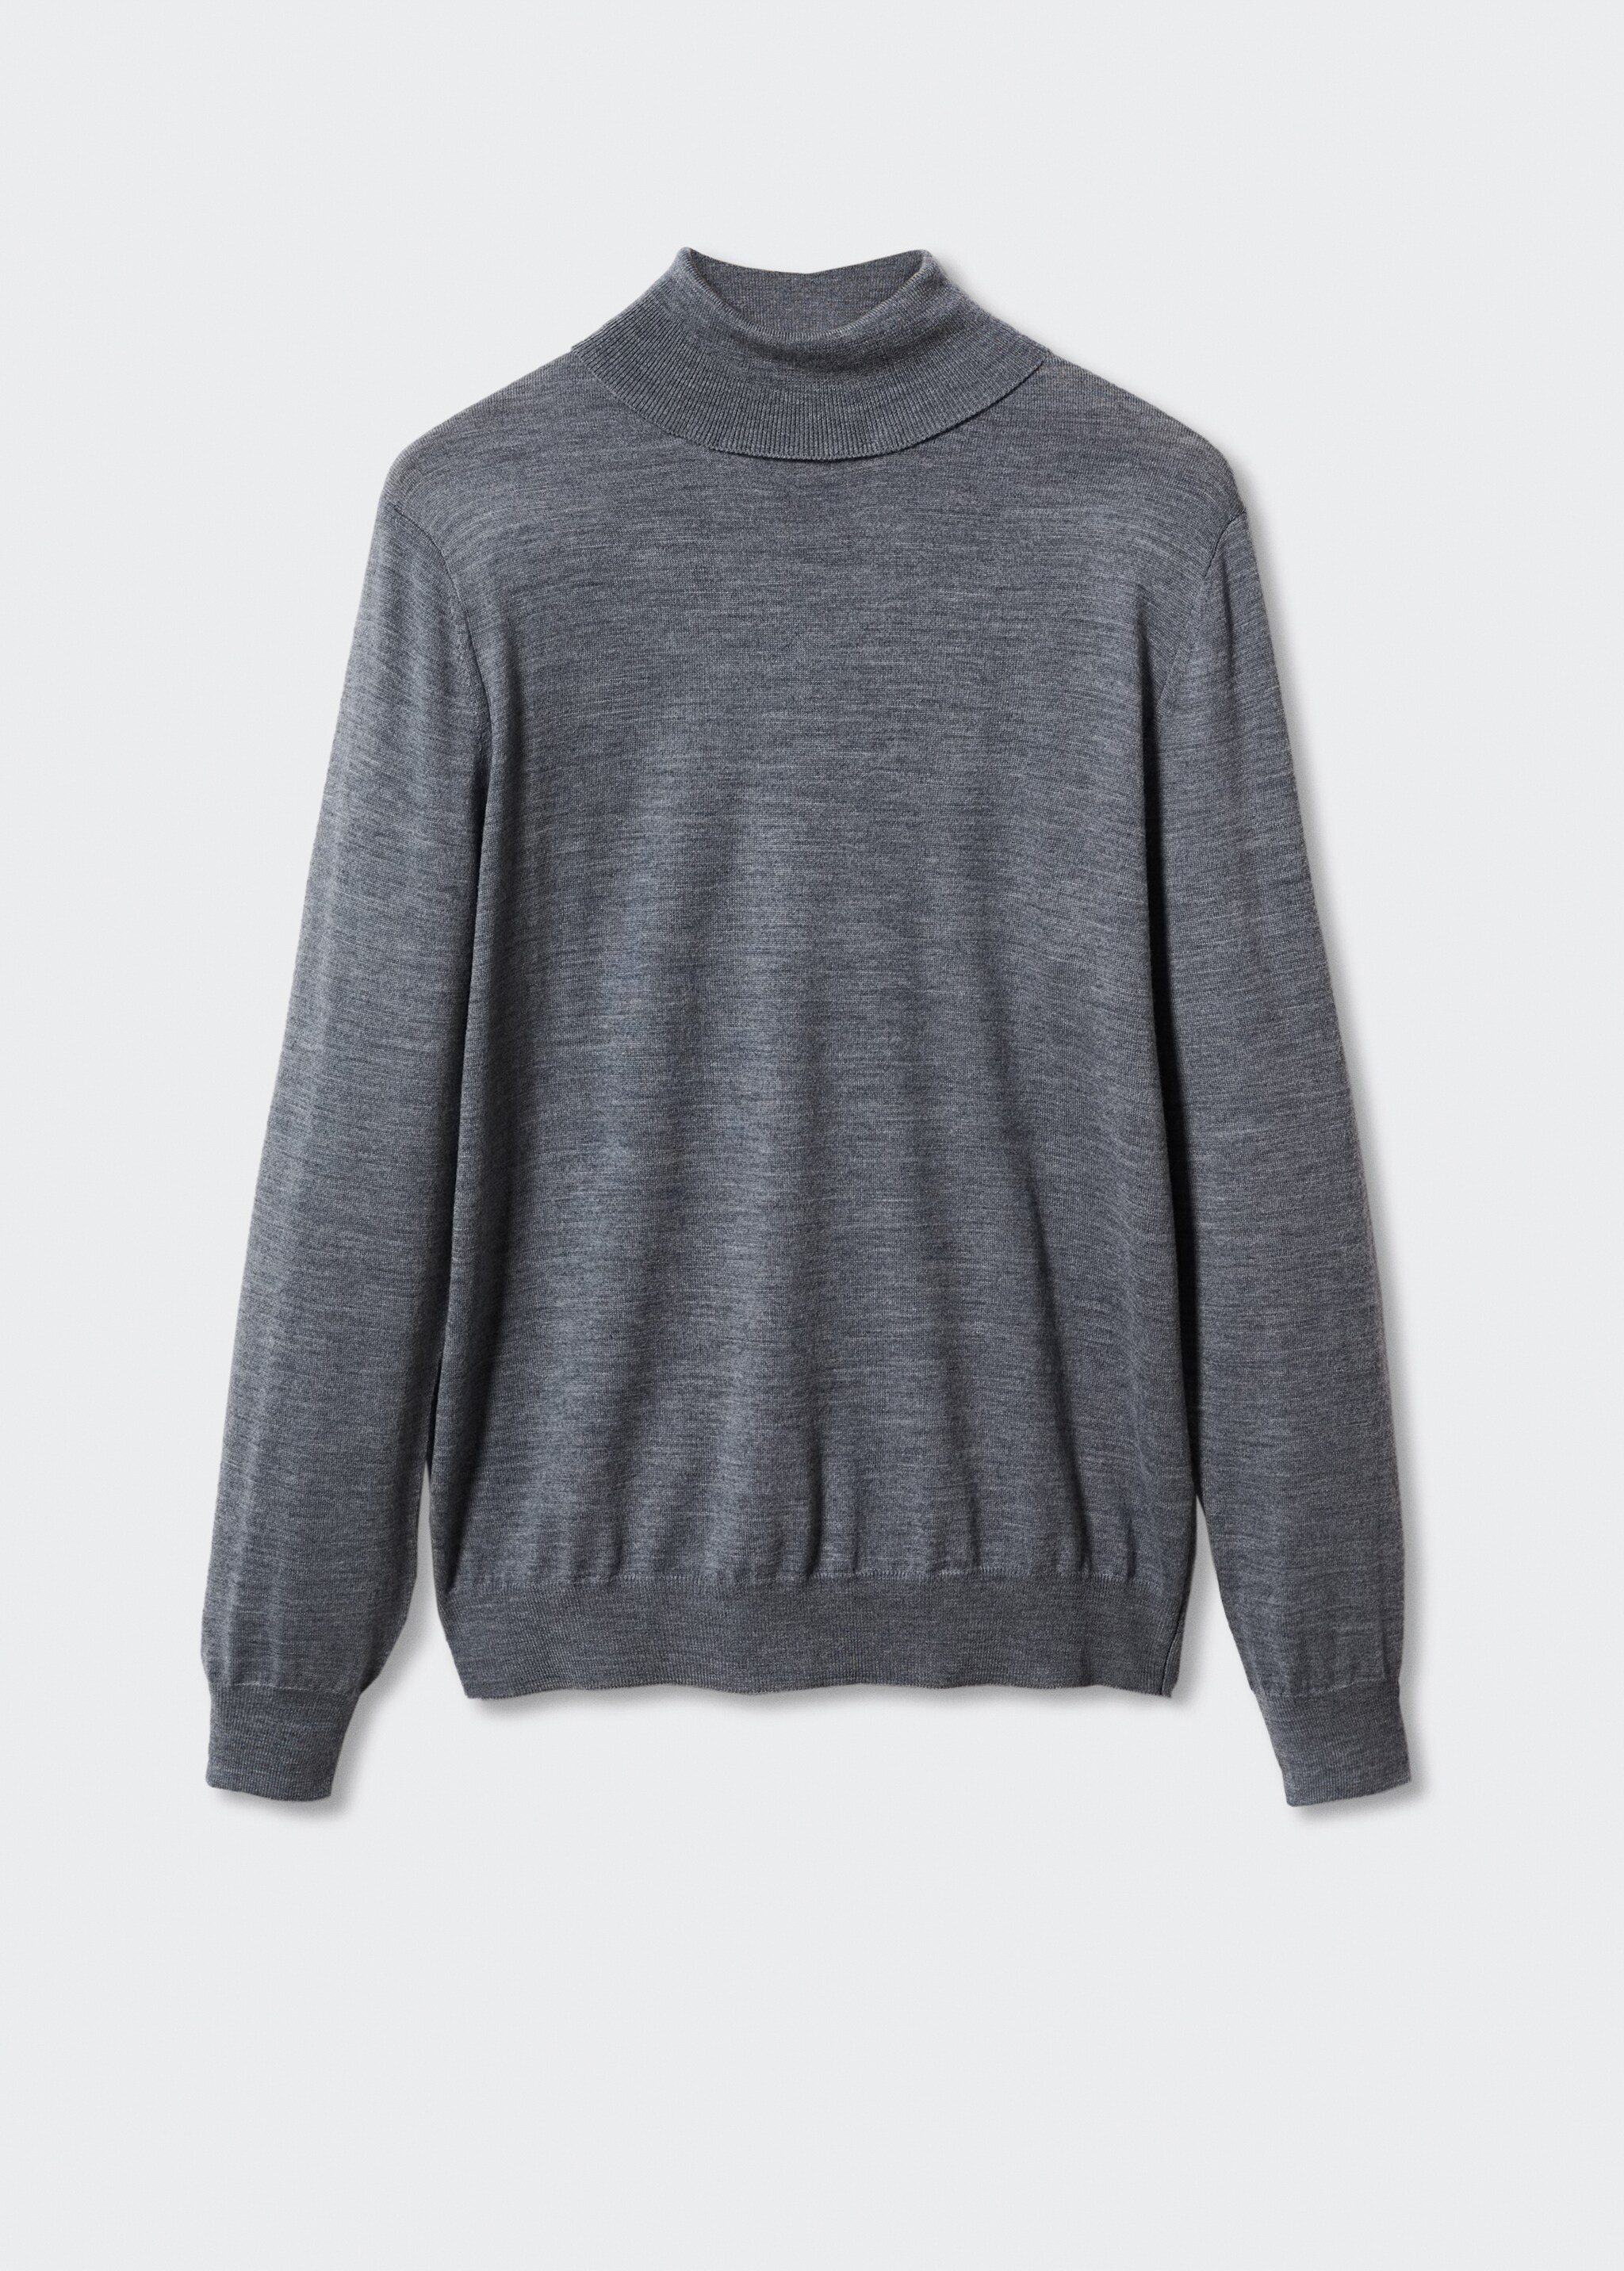 100% merino wool sweater - Article without model